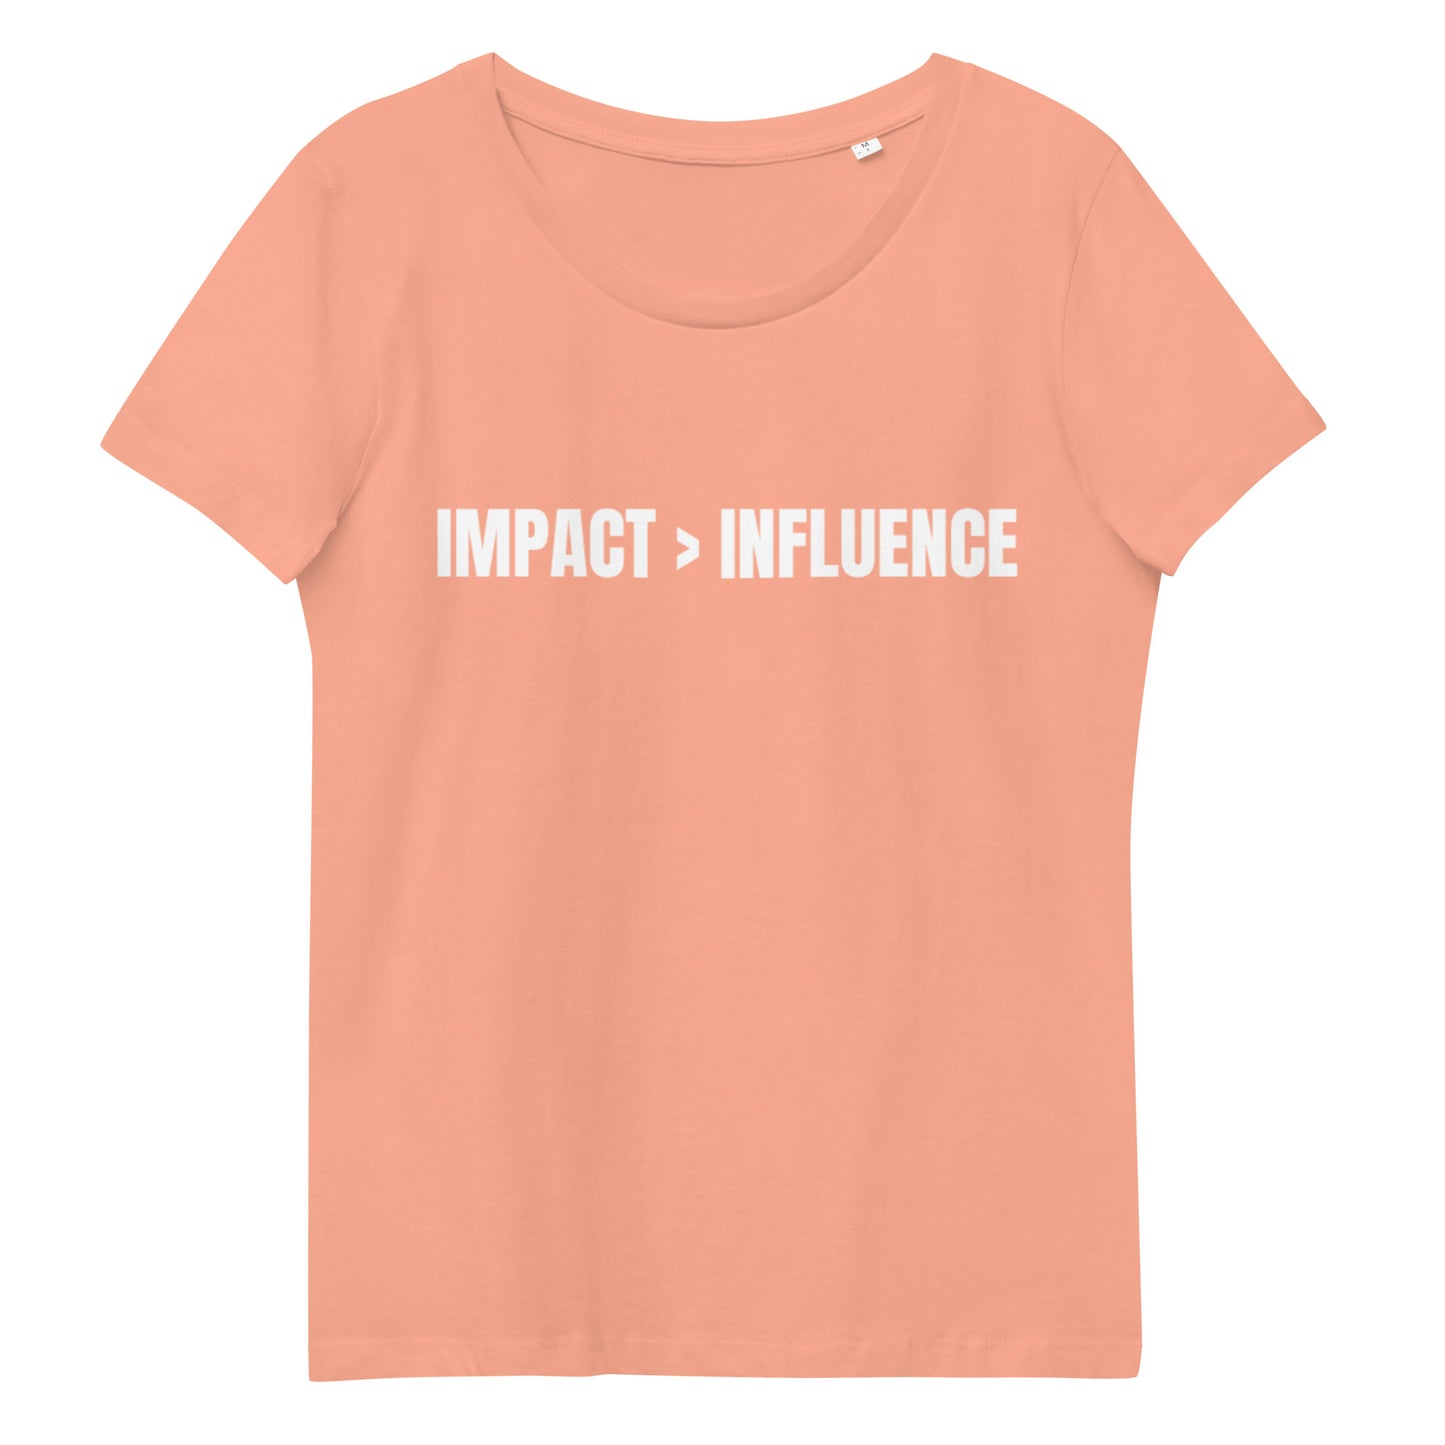 IMPACT > INFLUENCE Ladies' Short Sleeve Fitted Tee